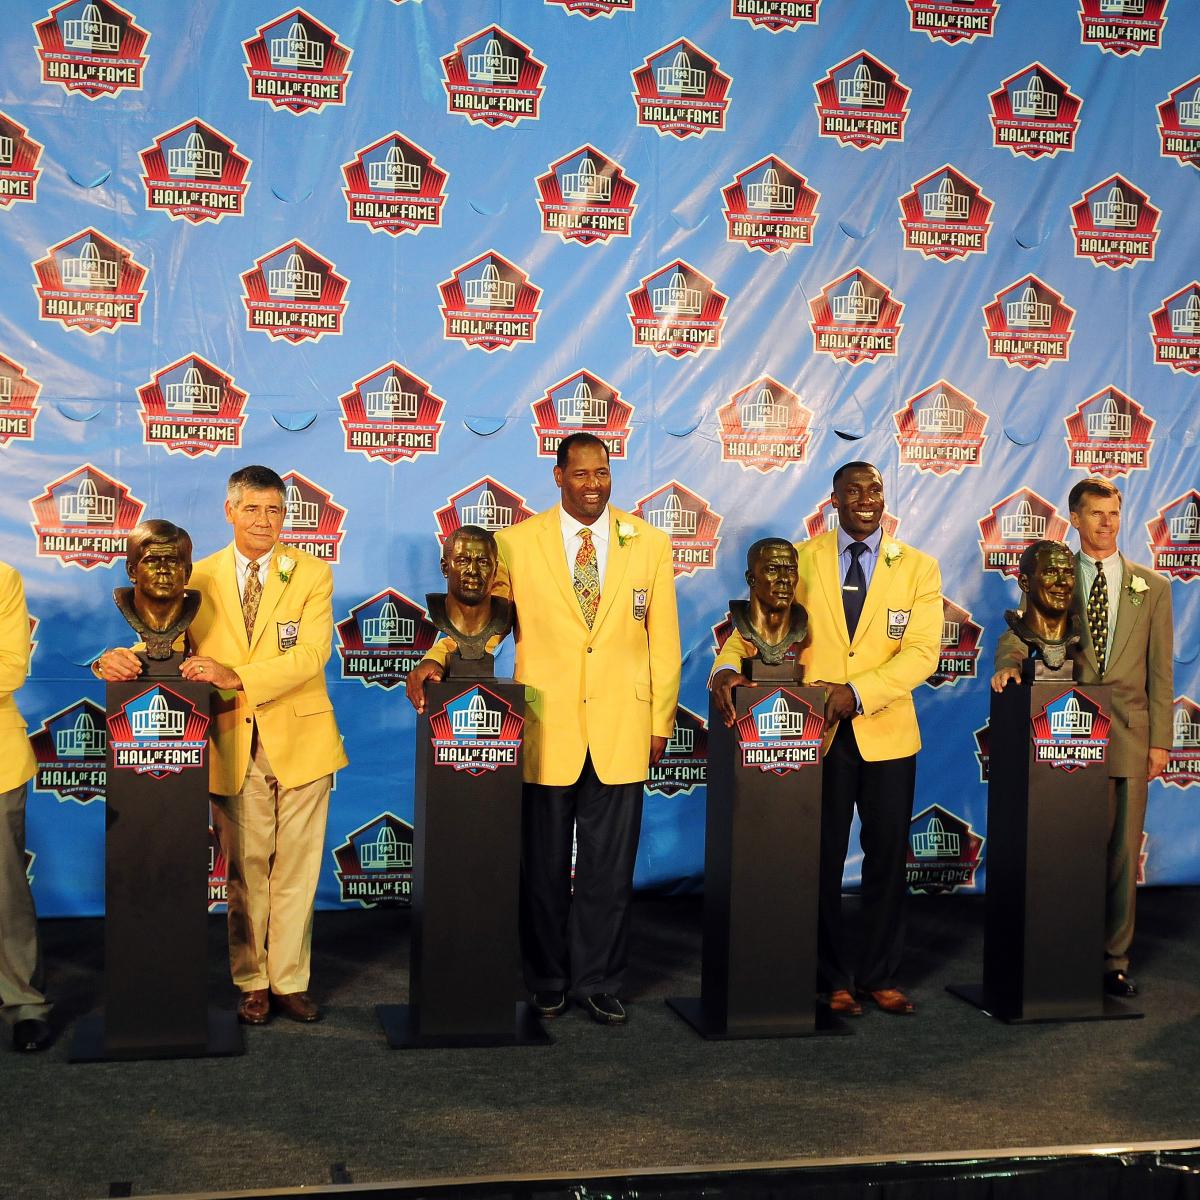 2012 Pro Football Hall of Fame: Complete List of Inductees to Canton | Bleacher Report